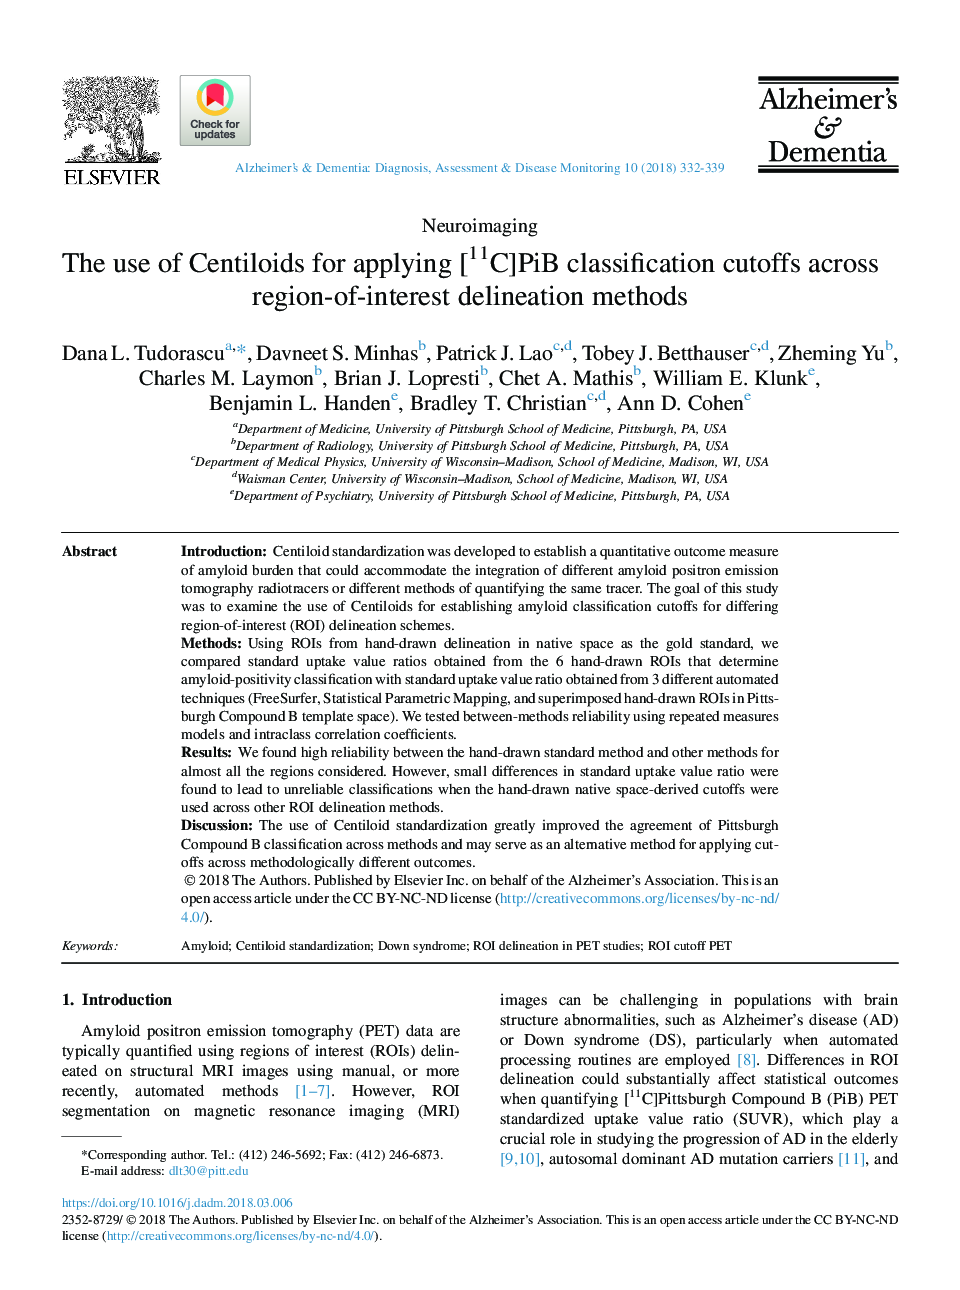 The use of Centiloids for applying [11C]PiB classification cutoffs across region-of-interest delineation methods